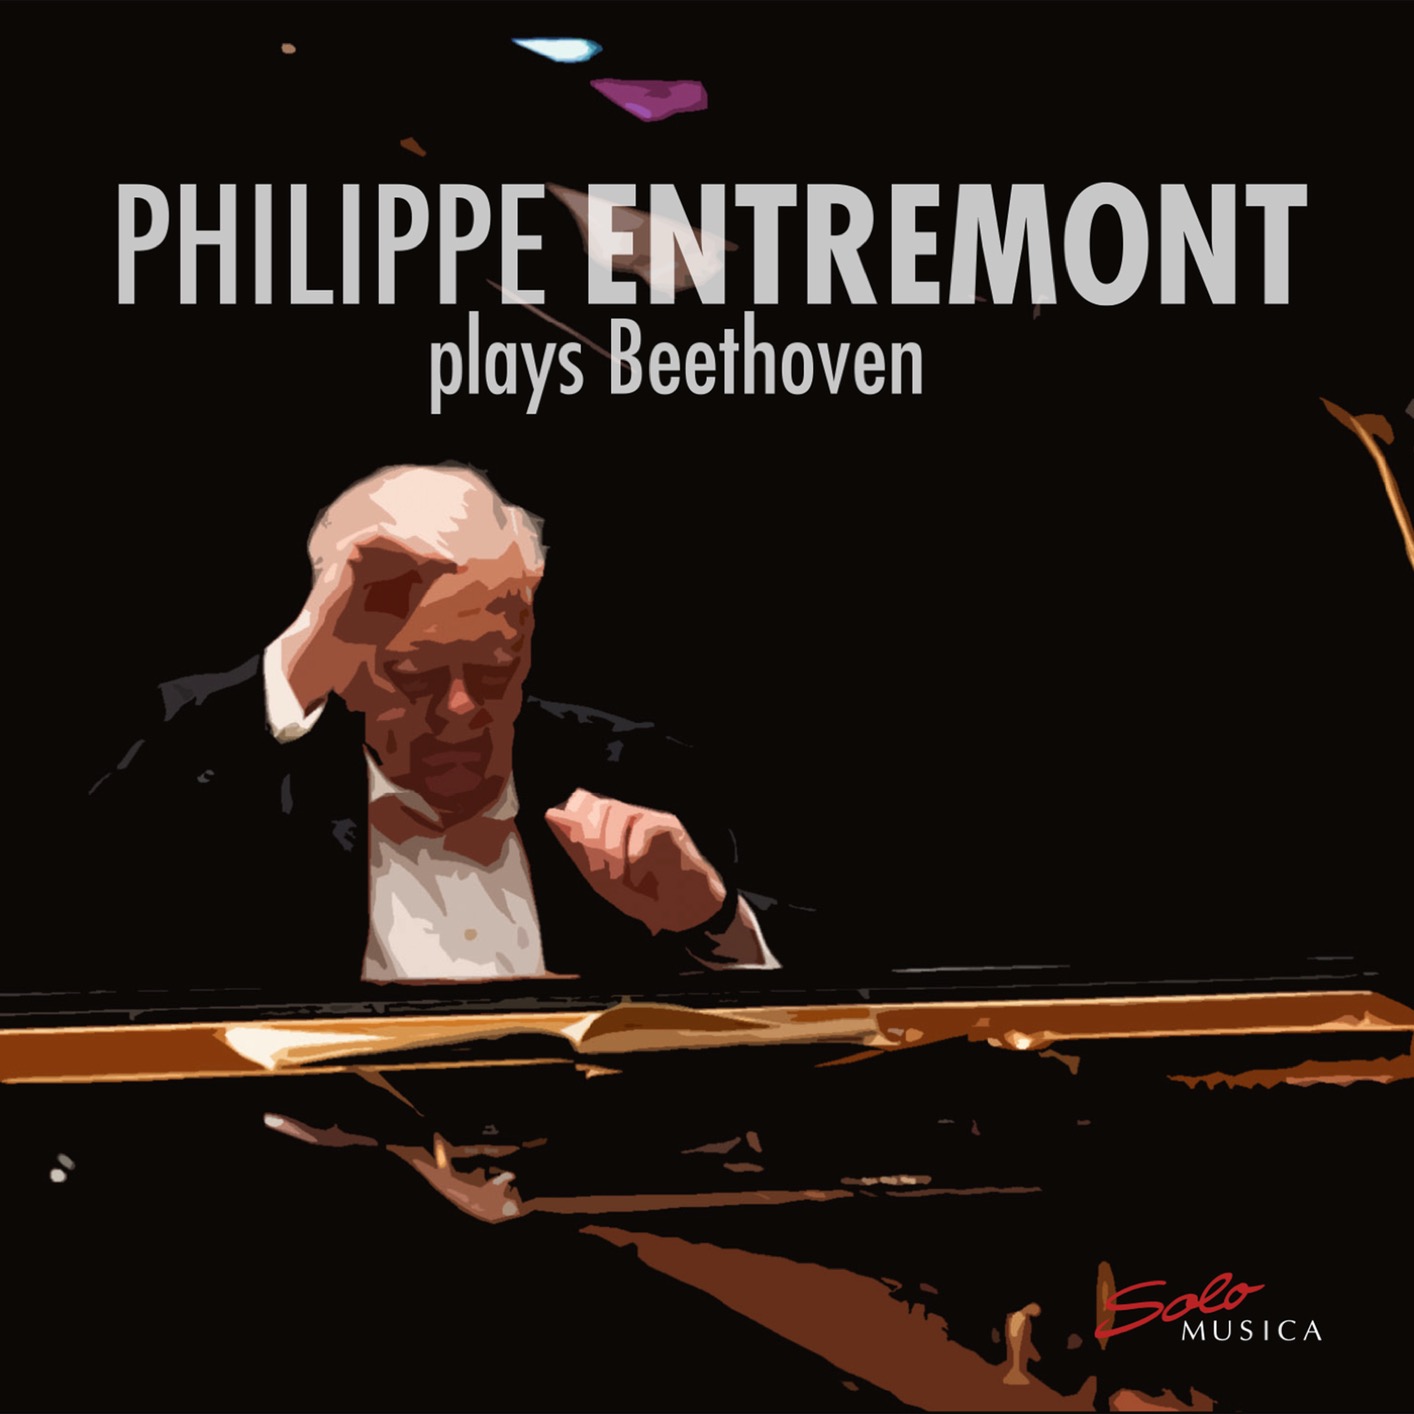 Philippe Entremont – Philippe Entremont plays Beethoven (2019) [FLAC 24bit/88,2kHz]